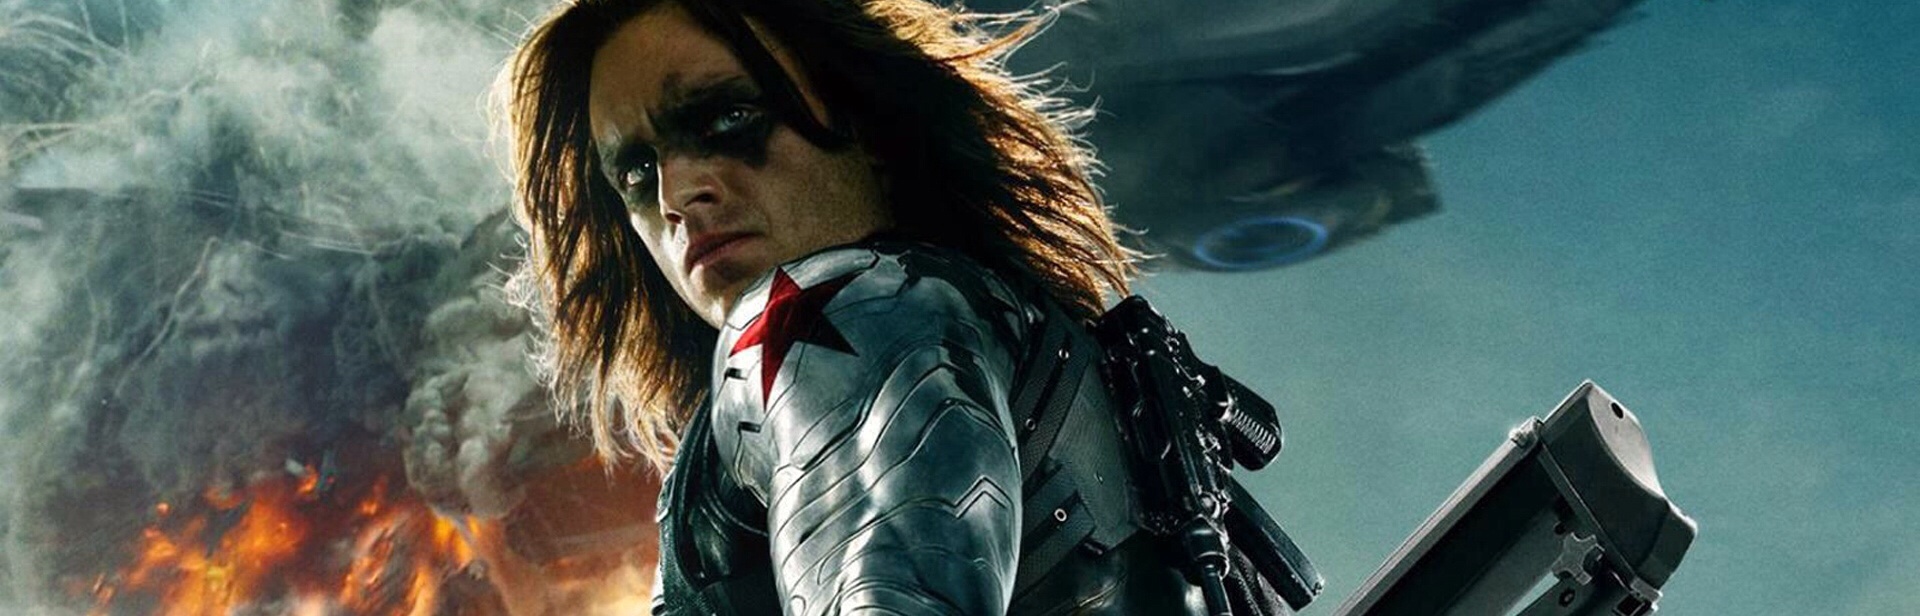 Captain America: The Winter Soldier Blu-ray SteelBook will be a Zavvi Exclusive in the UK